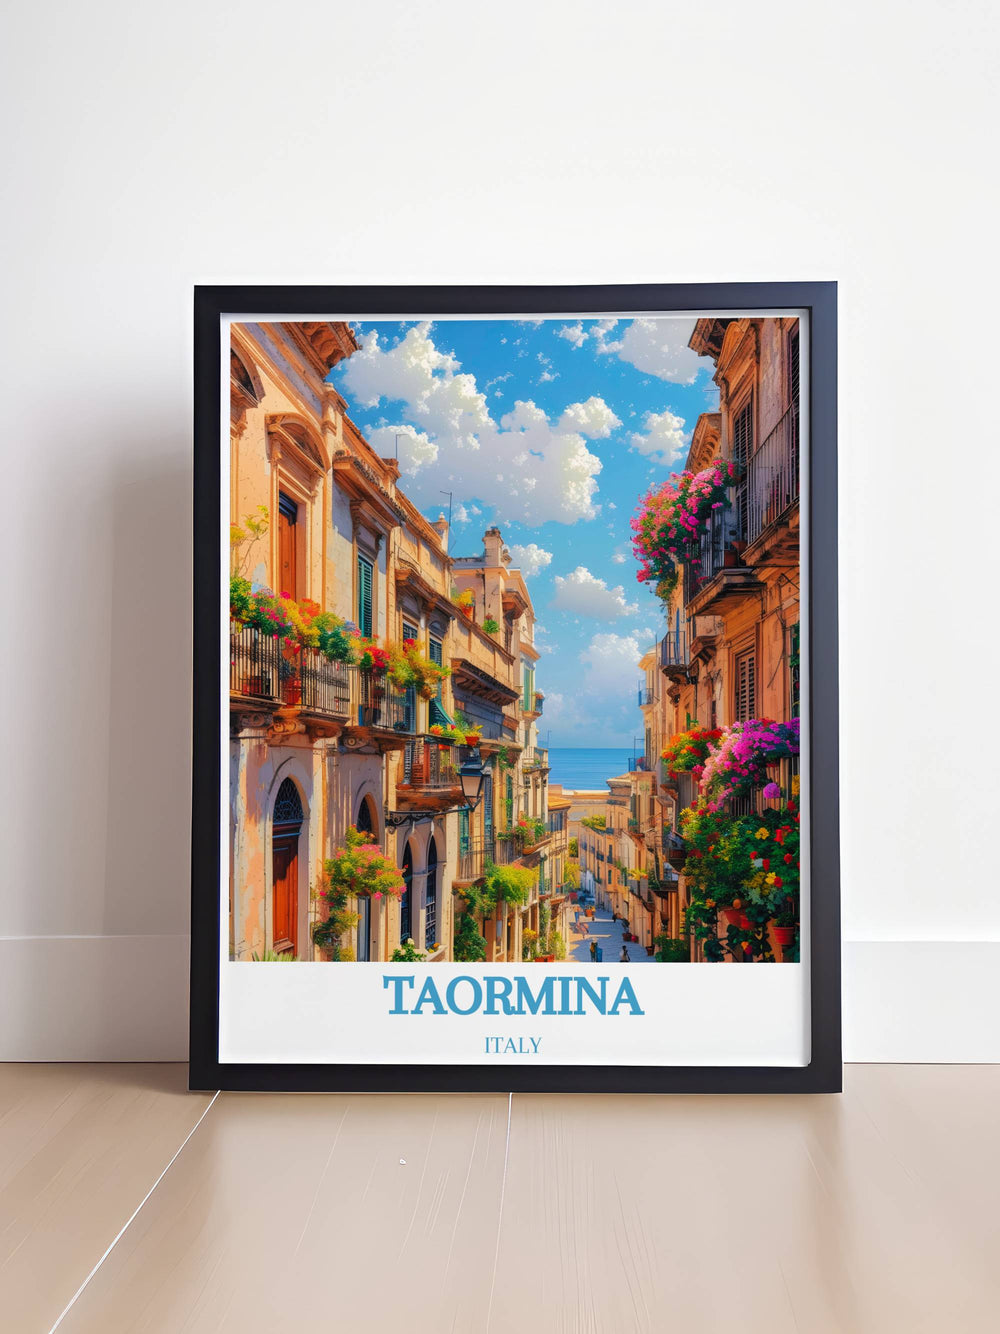 Stunning Corso Umberto framed art showcasing the elegant architecture and lively atmosphere of Taormina, a perfect addition to your home decor that celebrates Italys rich cultural heritage.